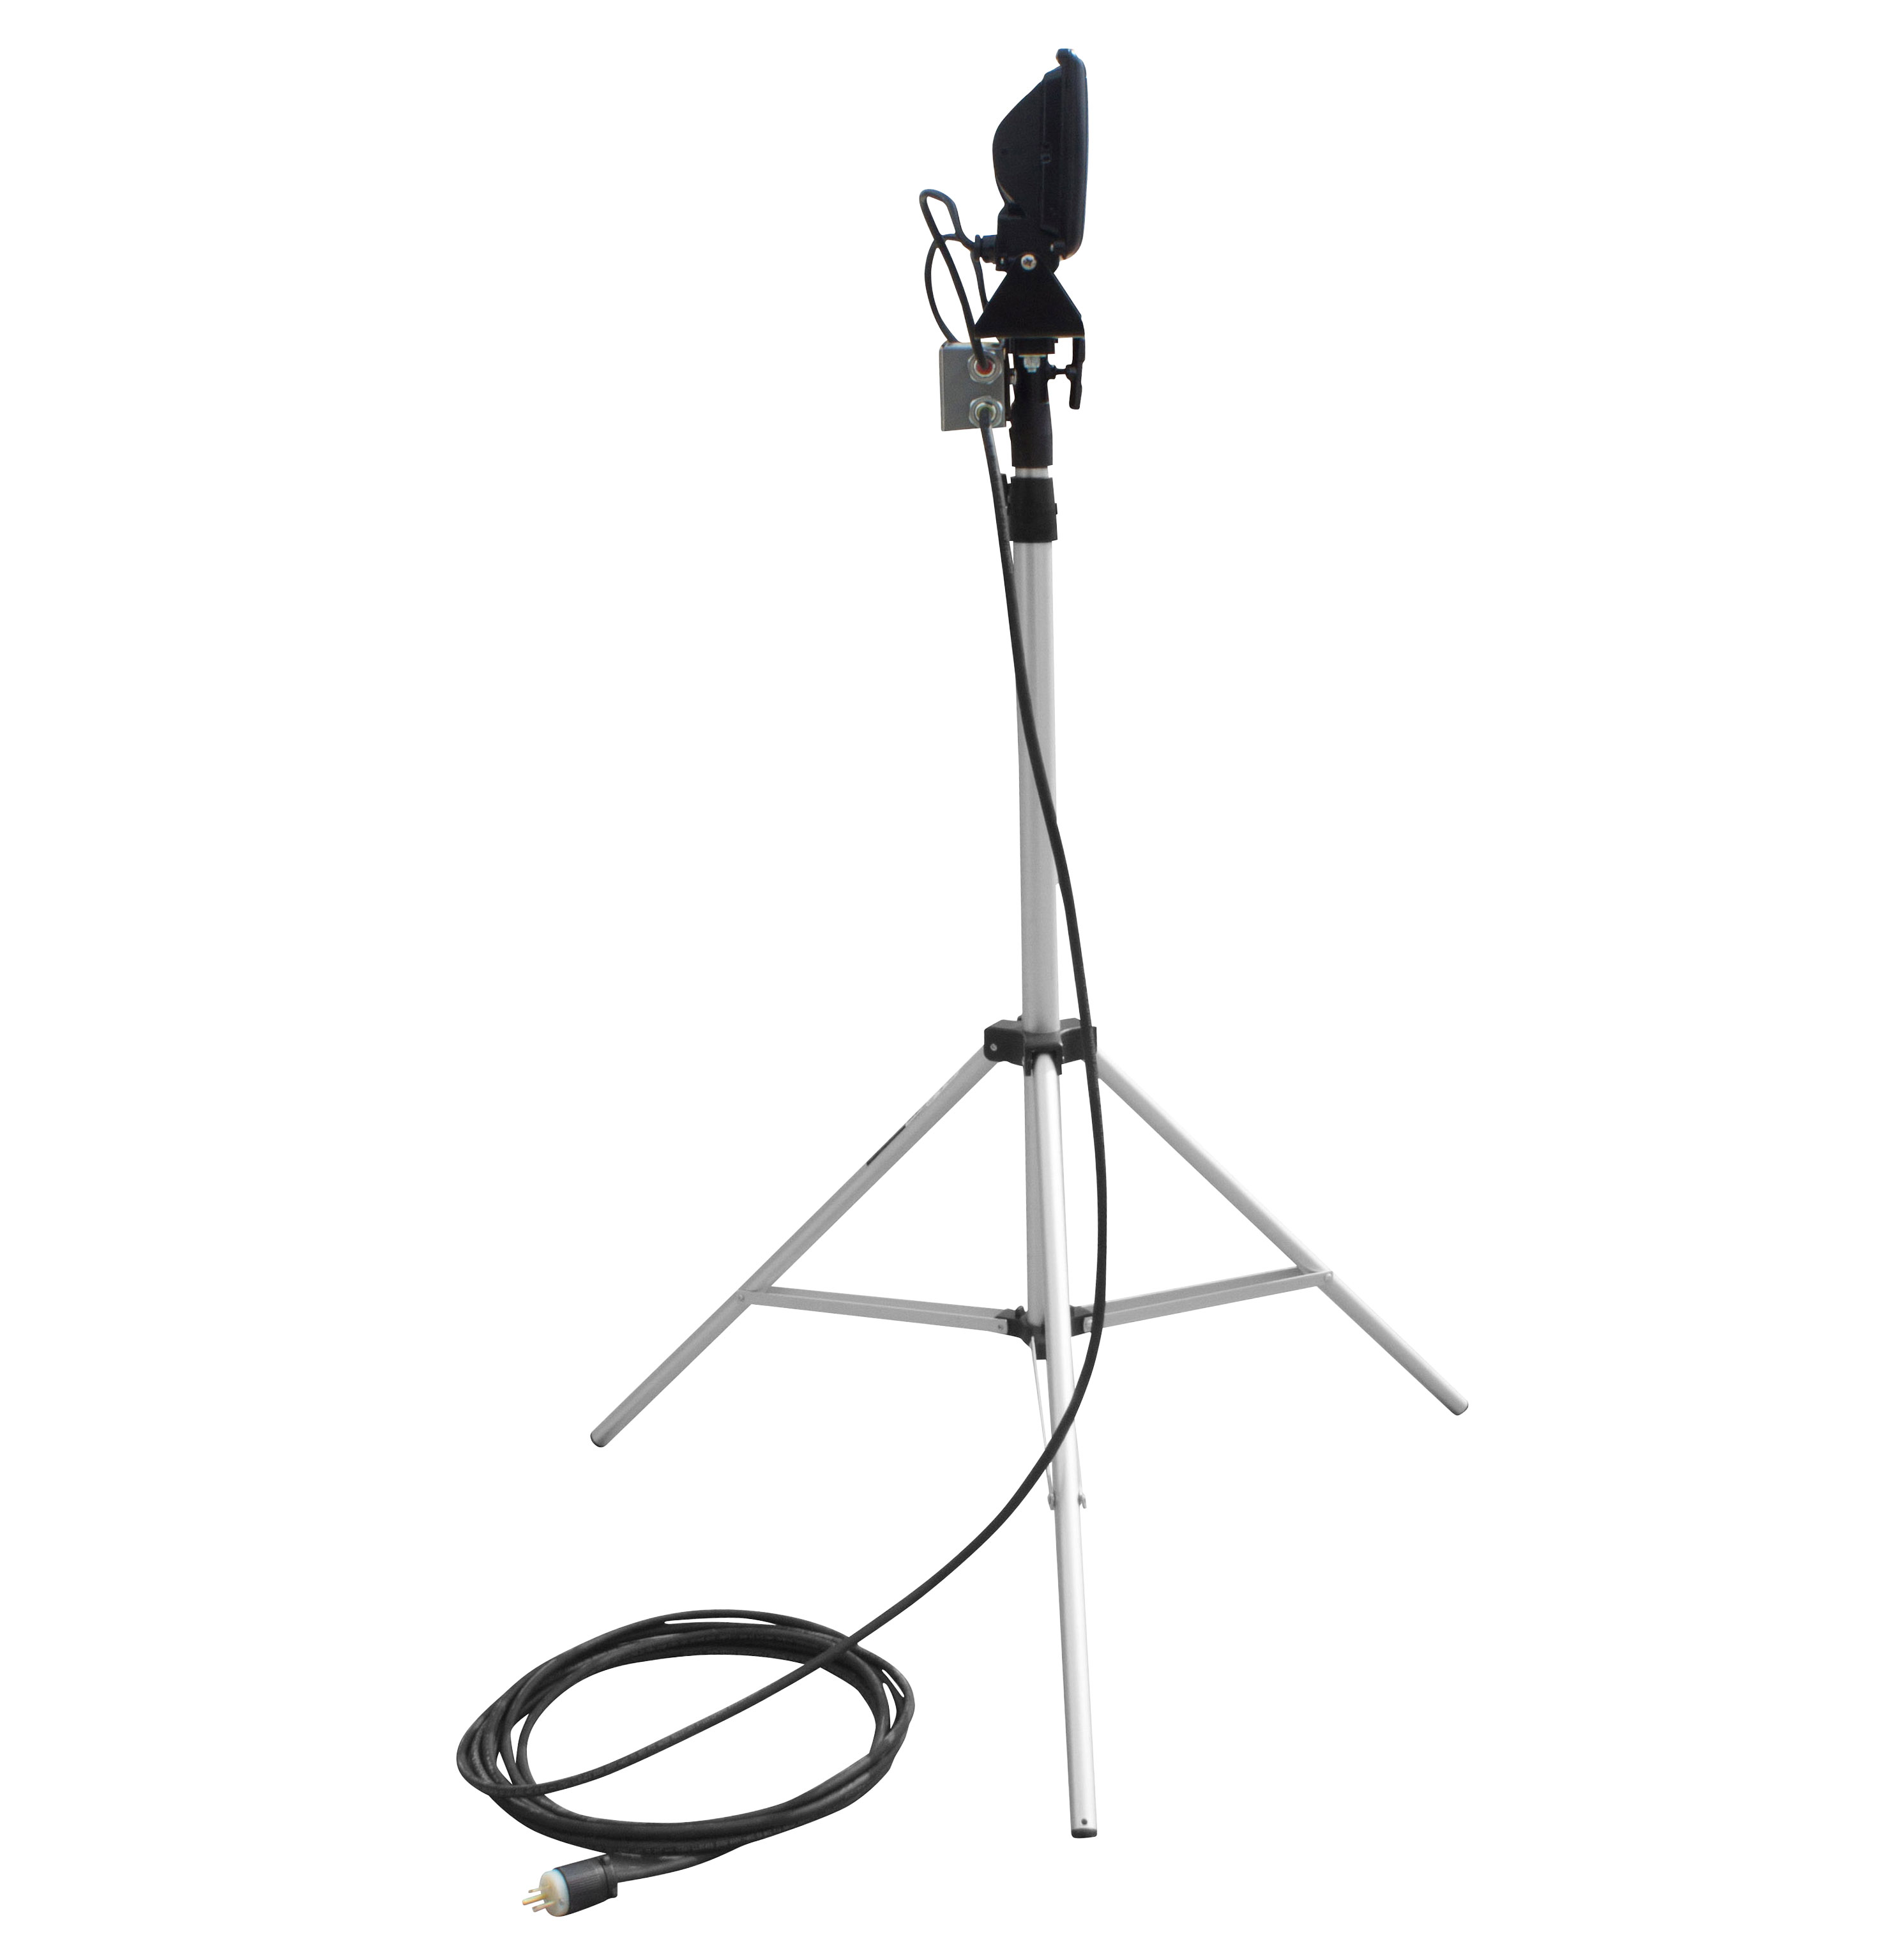 120 Watt LED Work Light on Collapsible Tripod with 25' Cord